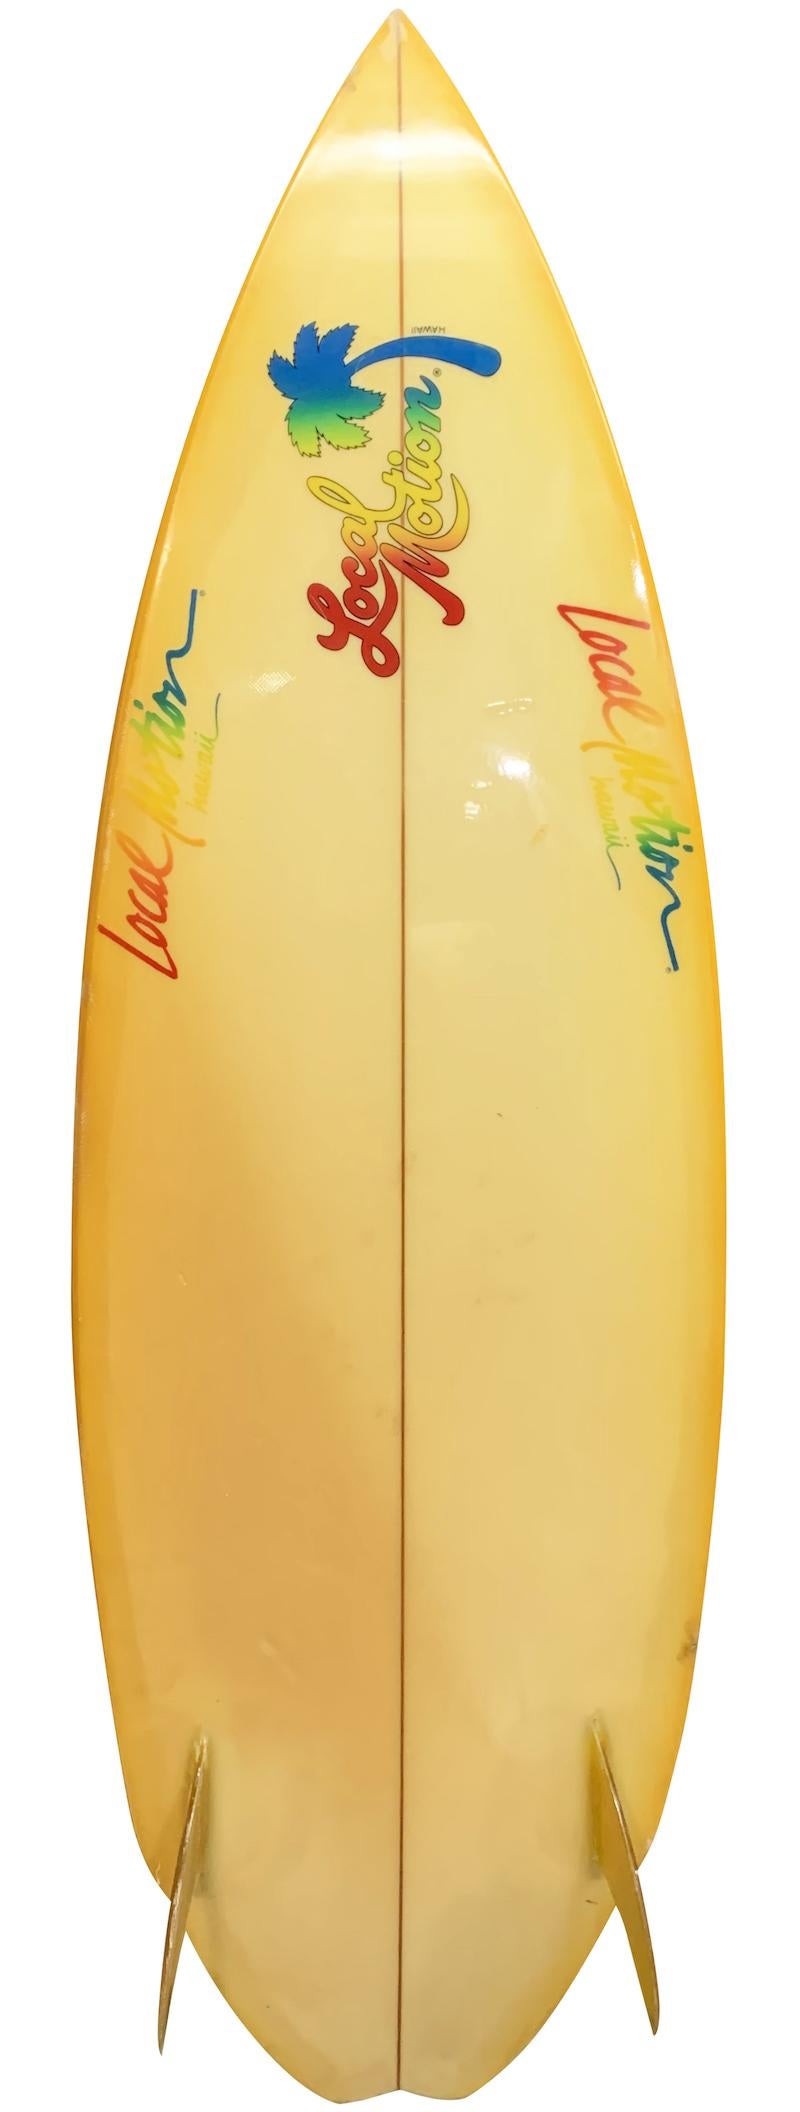 Mid-late 1980s vintage local motion twin-fin surfboard shaped by Pat Rawson. Featuring rainbow Local Motion laminates with a glassed on twin-fin setup. A great example of a 1980s retro shortboard in all original condition.

Pat Rawson is one of